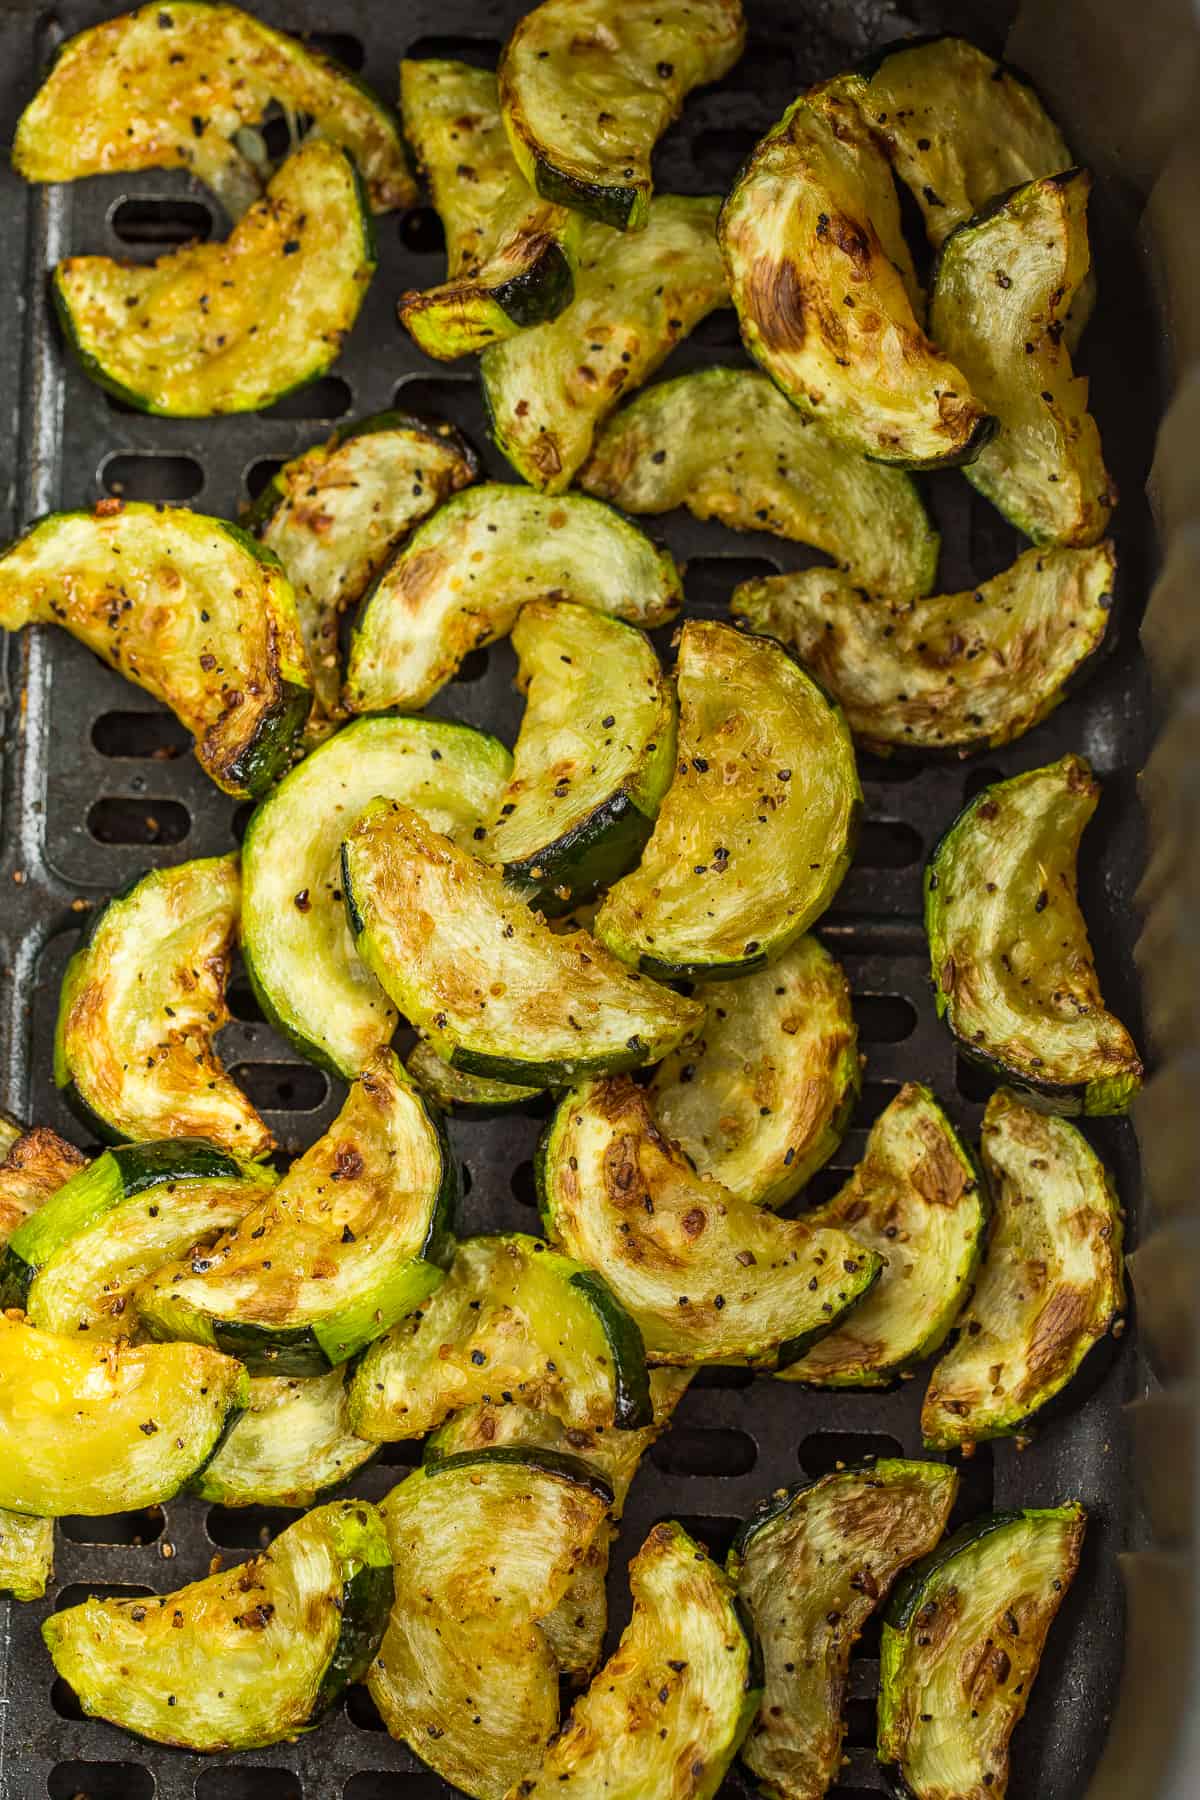 roasted slices of zucchini.